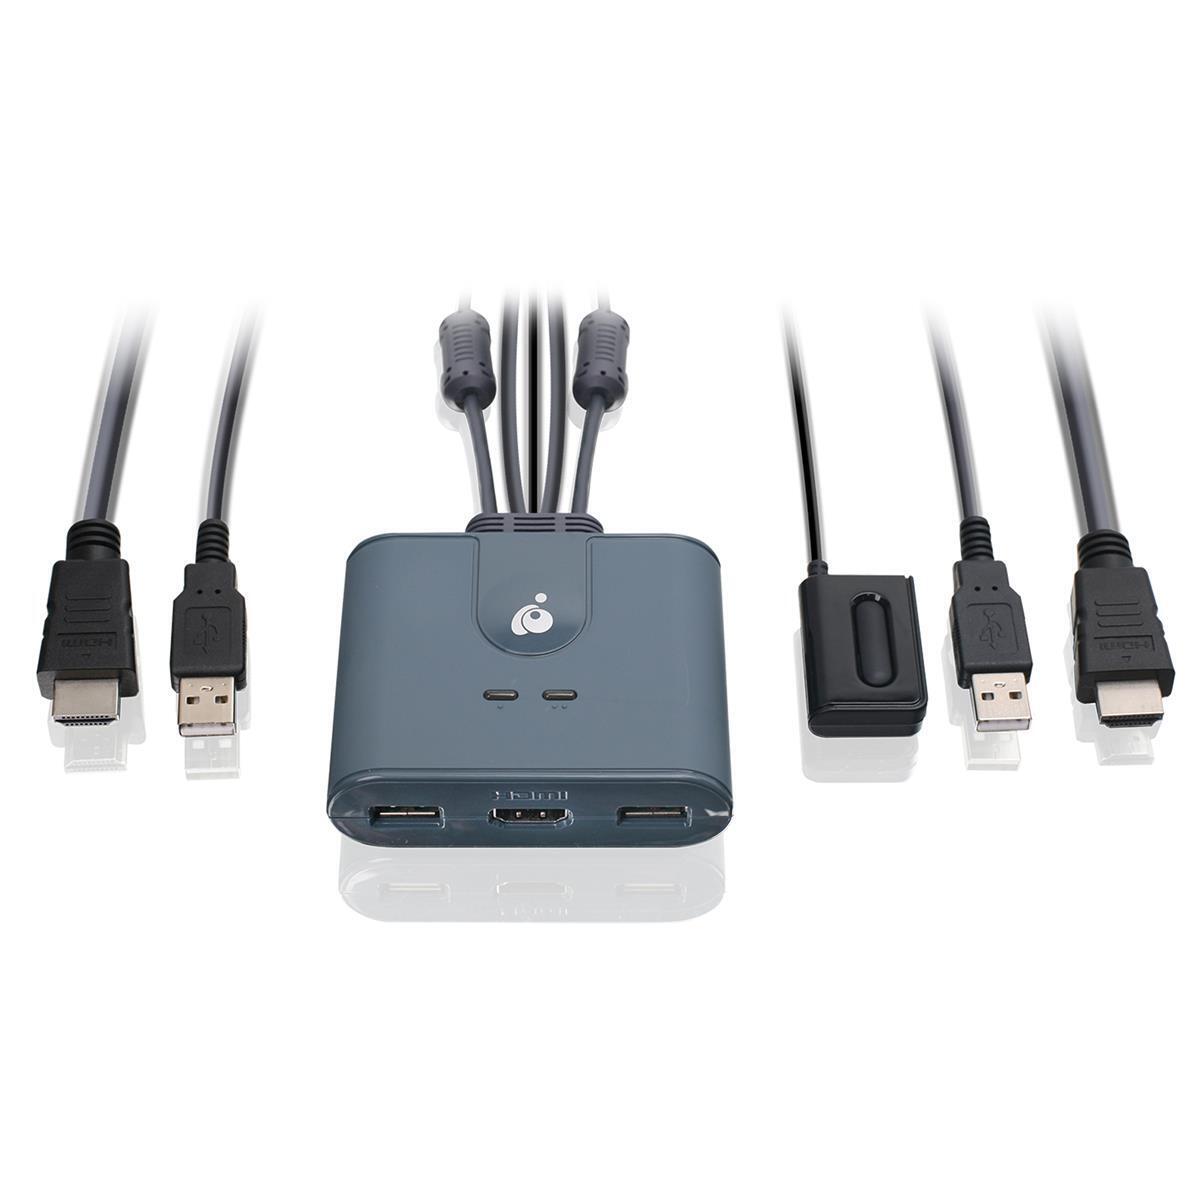 IOGEAR 2-Port Full HD KVM Switch with HDMI and USB Connections #GCS32HU